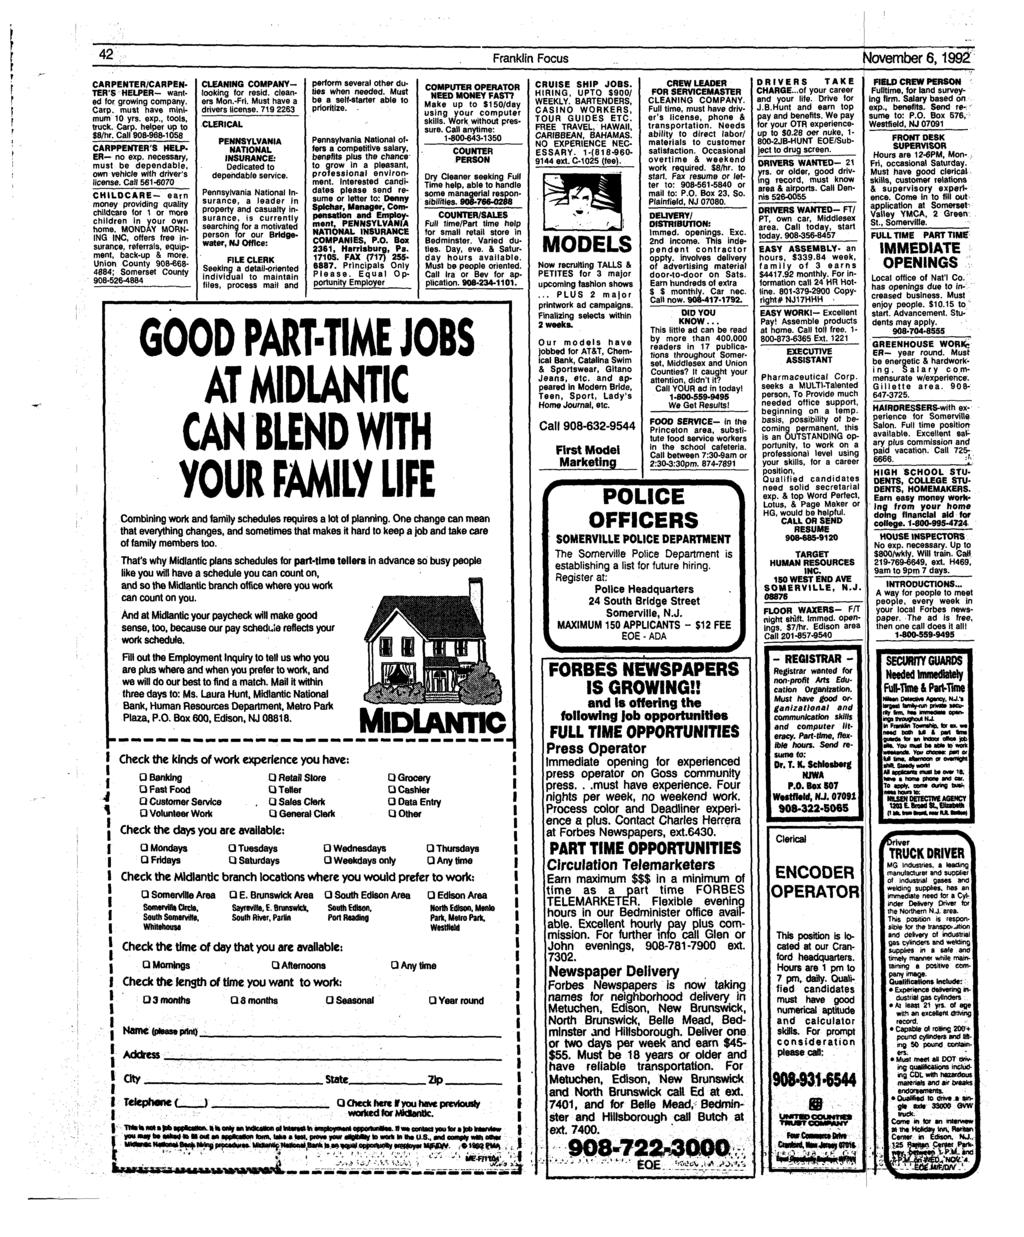 42 Franklin Focus November 6,1992 CARPENTER/CARPEN- TER'S HELPER- wanted for growing company. Carp, must have minimum 10 yrs. exp., tools, truck. Carp, helper up to $8/hr.